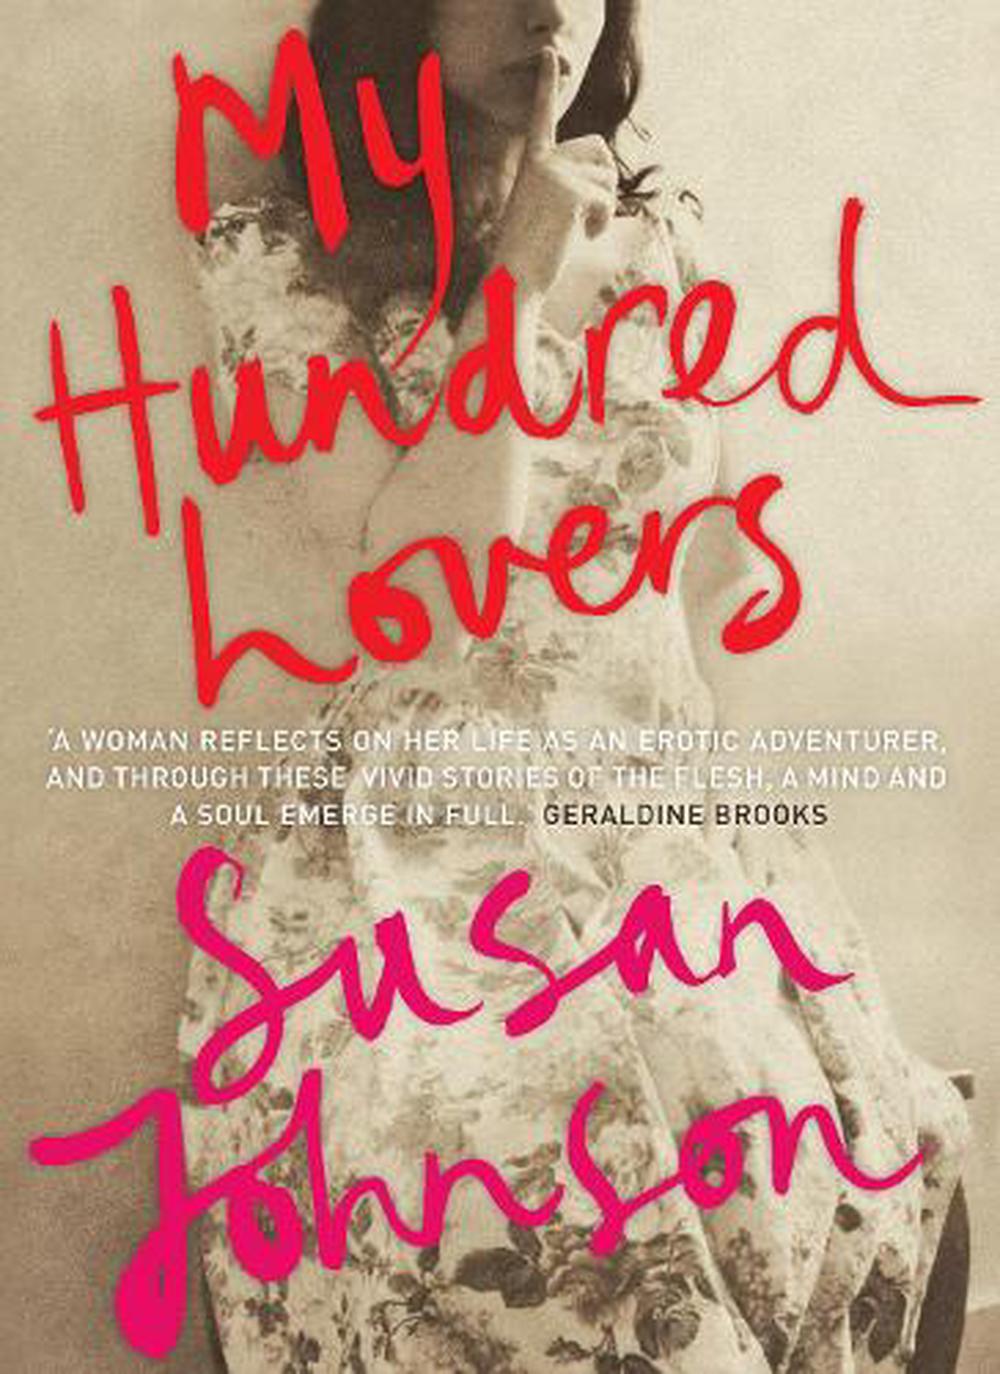 My Hundred Lovers by Susan Johnson (English) Paperback Book Free Shipping! 9781743315699 eBay